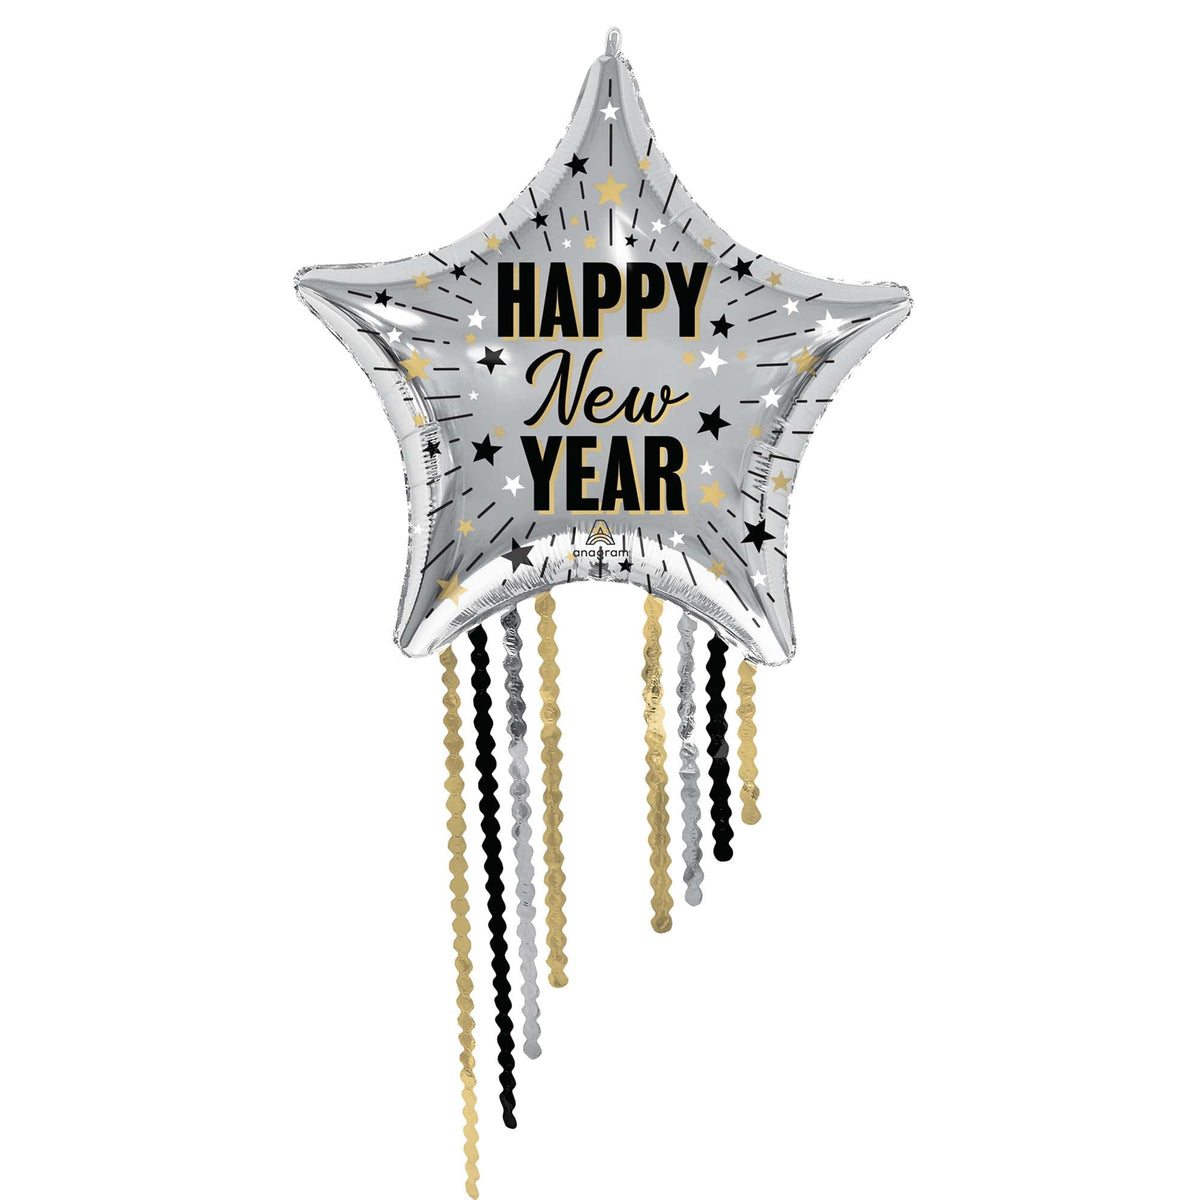 LE GROUPE BLC INTL INC Balloons New Year Eve Celebration Star Supershape Balloon with Fringe, 50 Inches, 1 Count